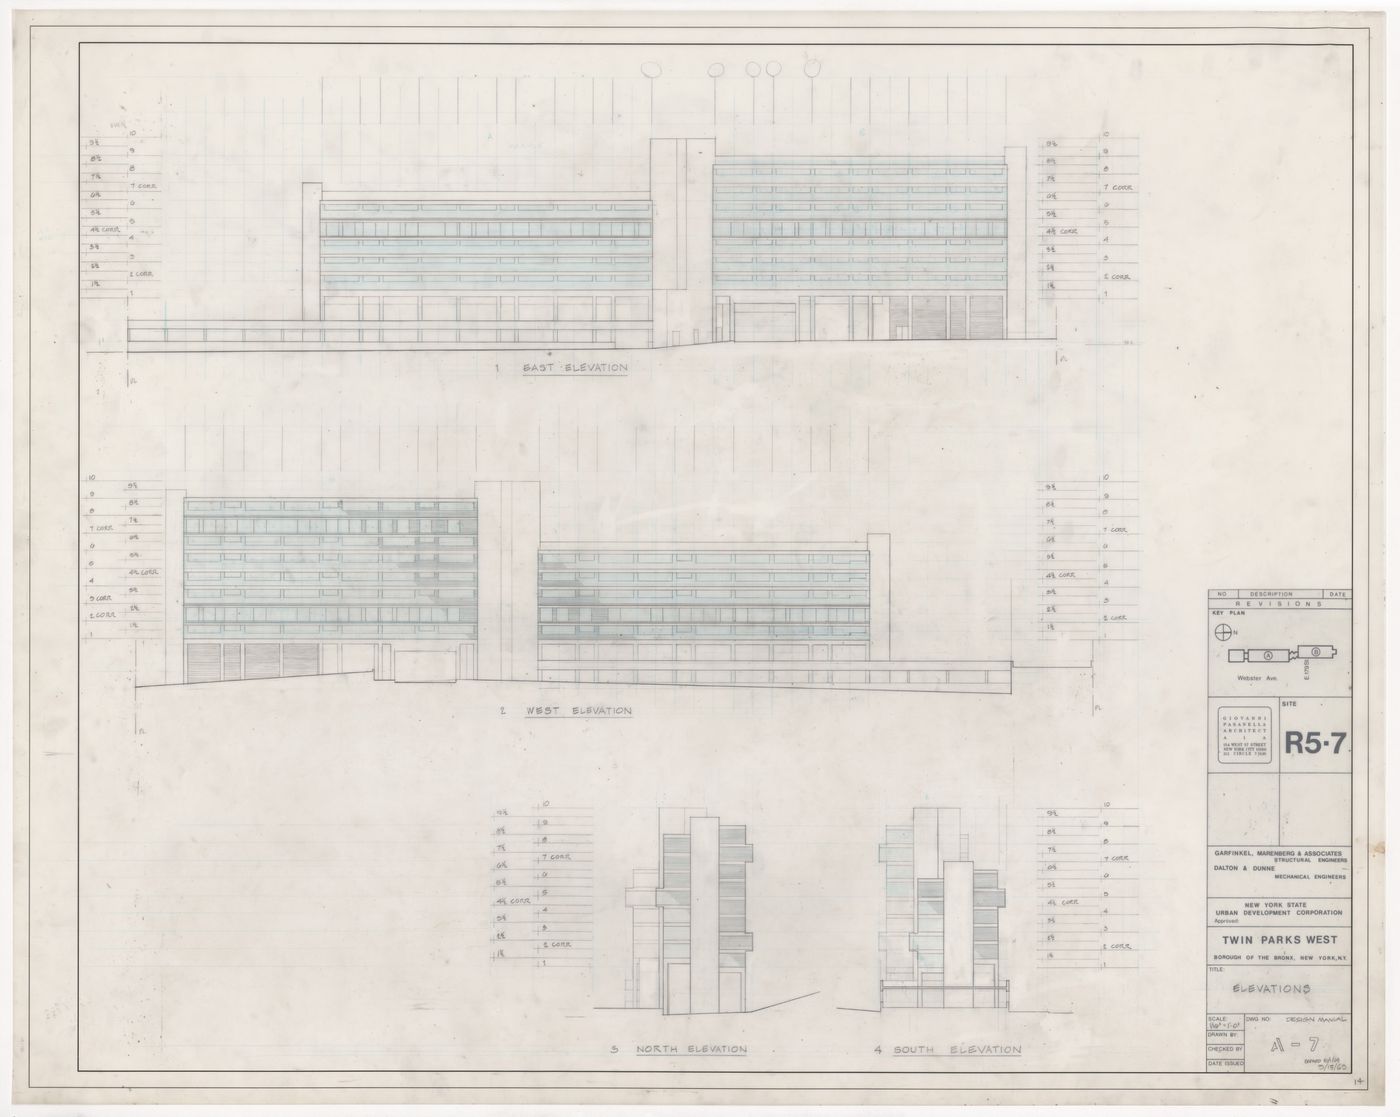 Elevations for Twin Parks West, Site R5-7, Bronx, New York